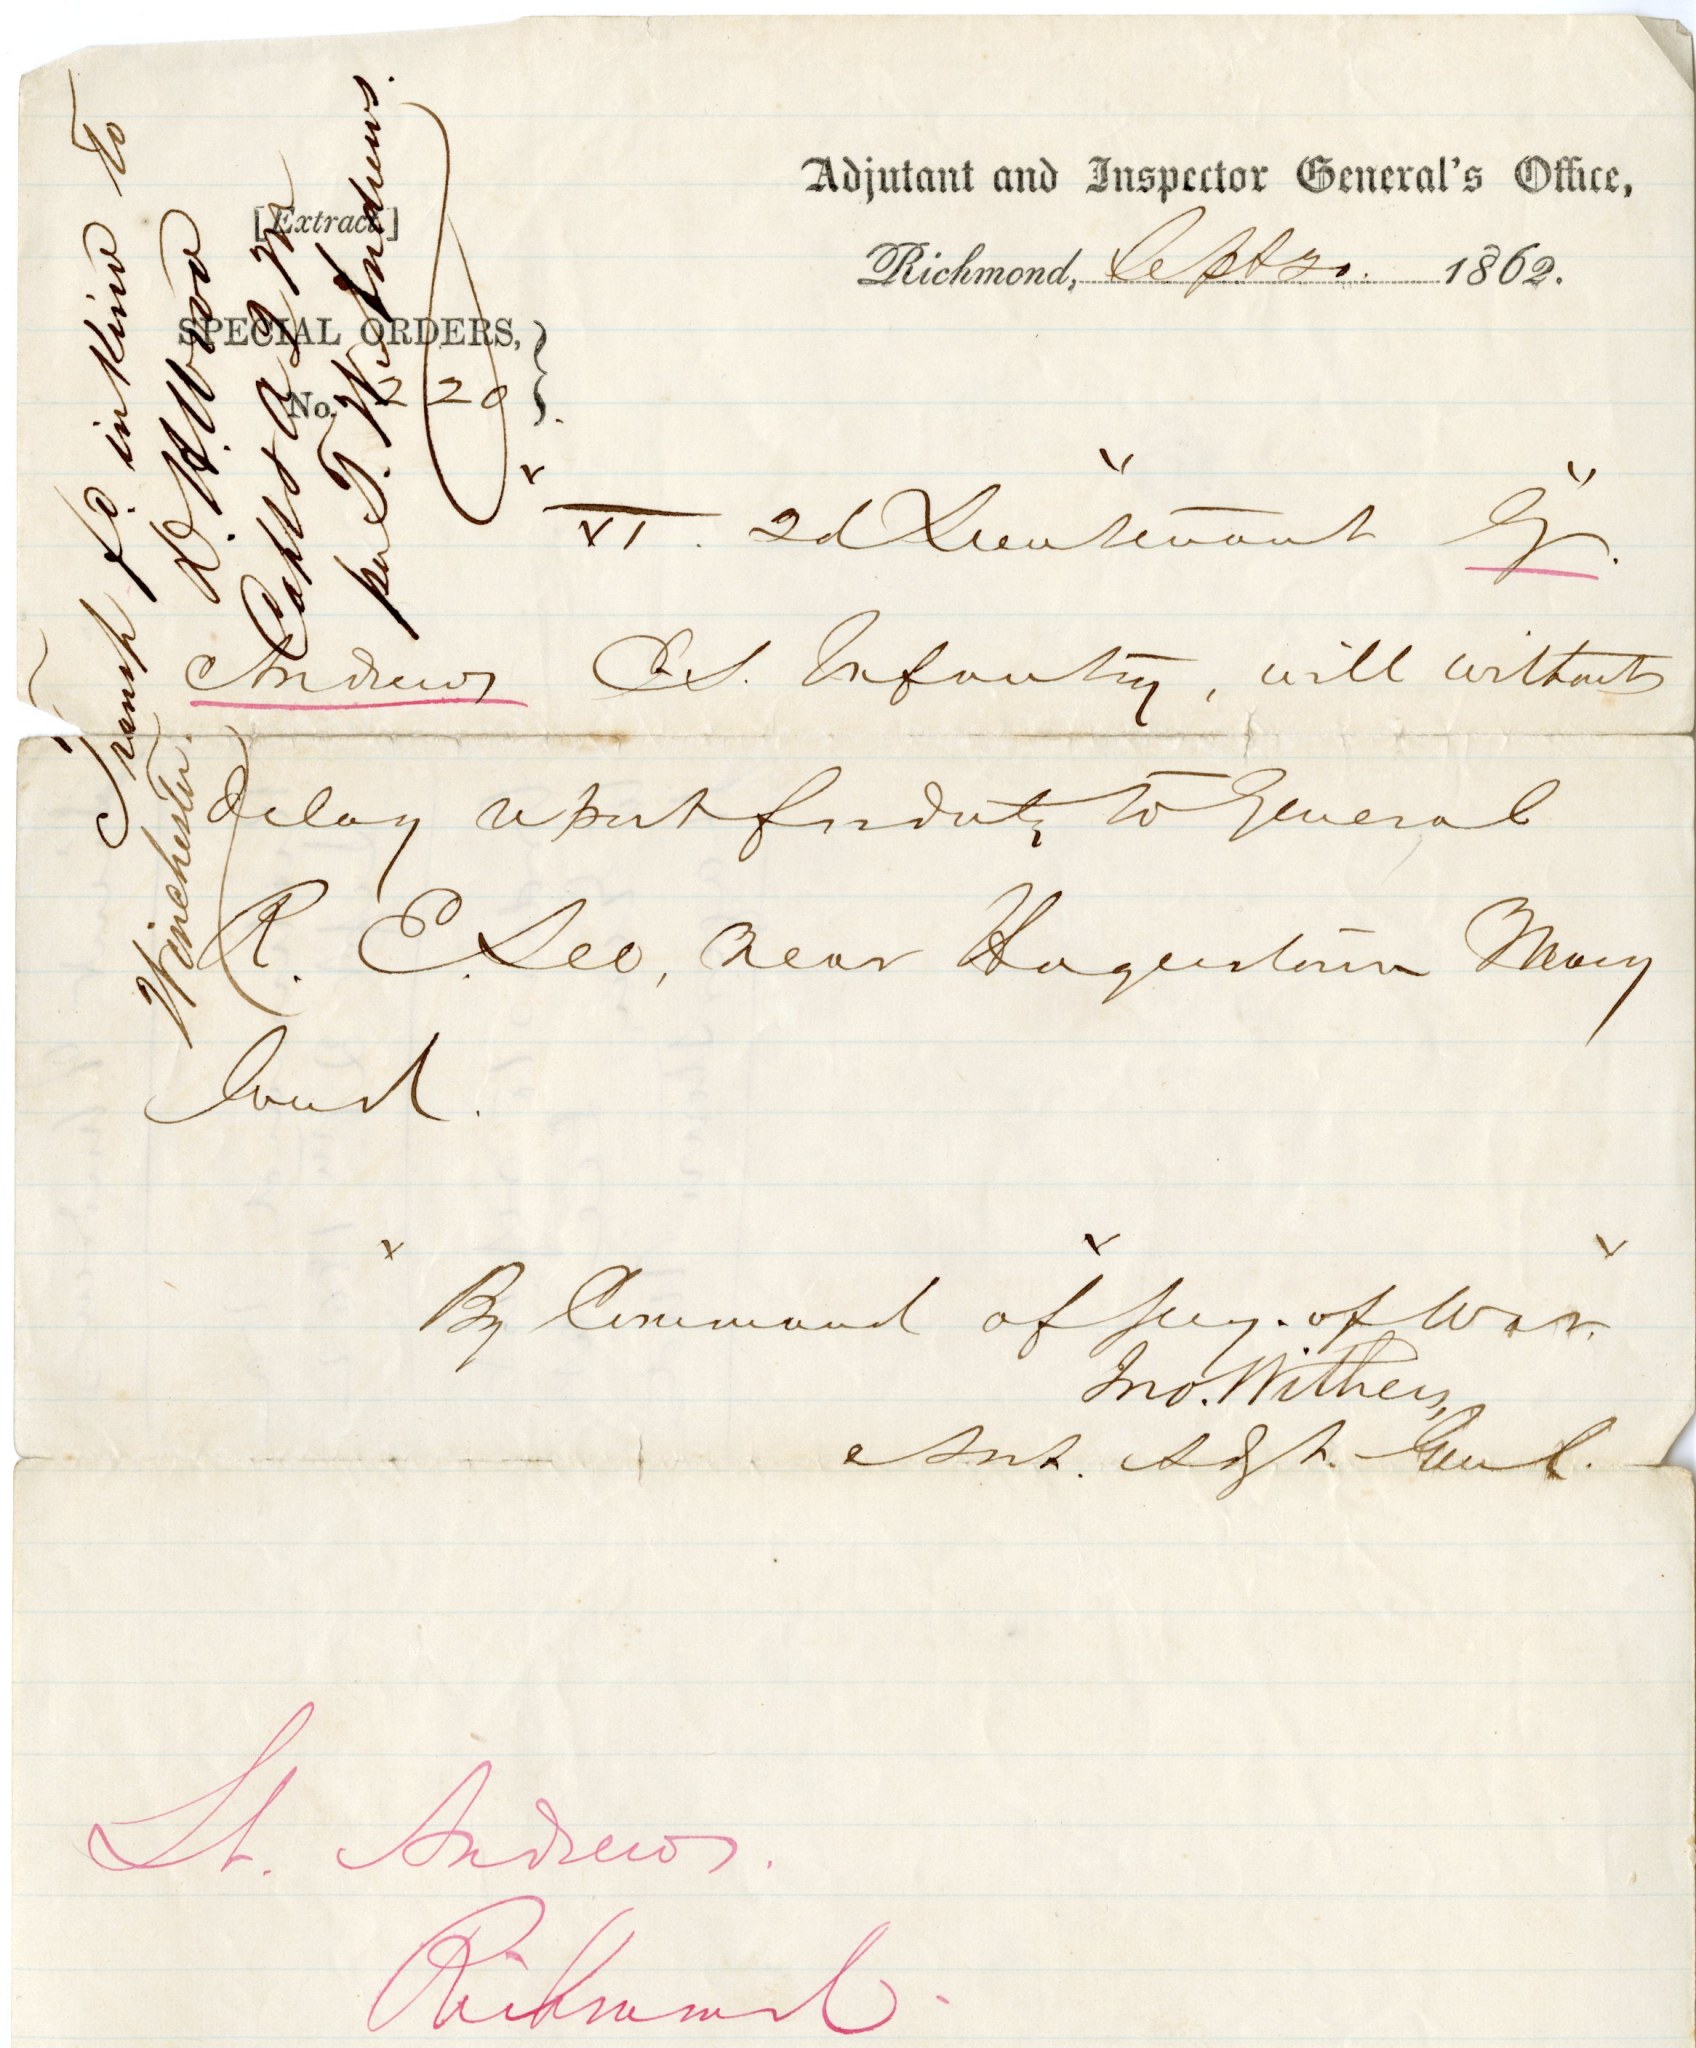 Military order instructing Garnett Andrews to report to General Robert E. Lee in Hagerstown, Maryland.